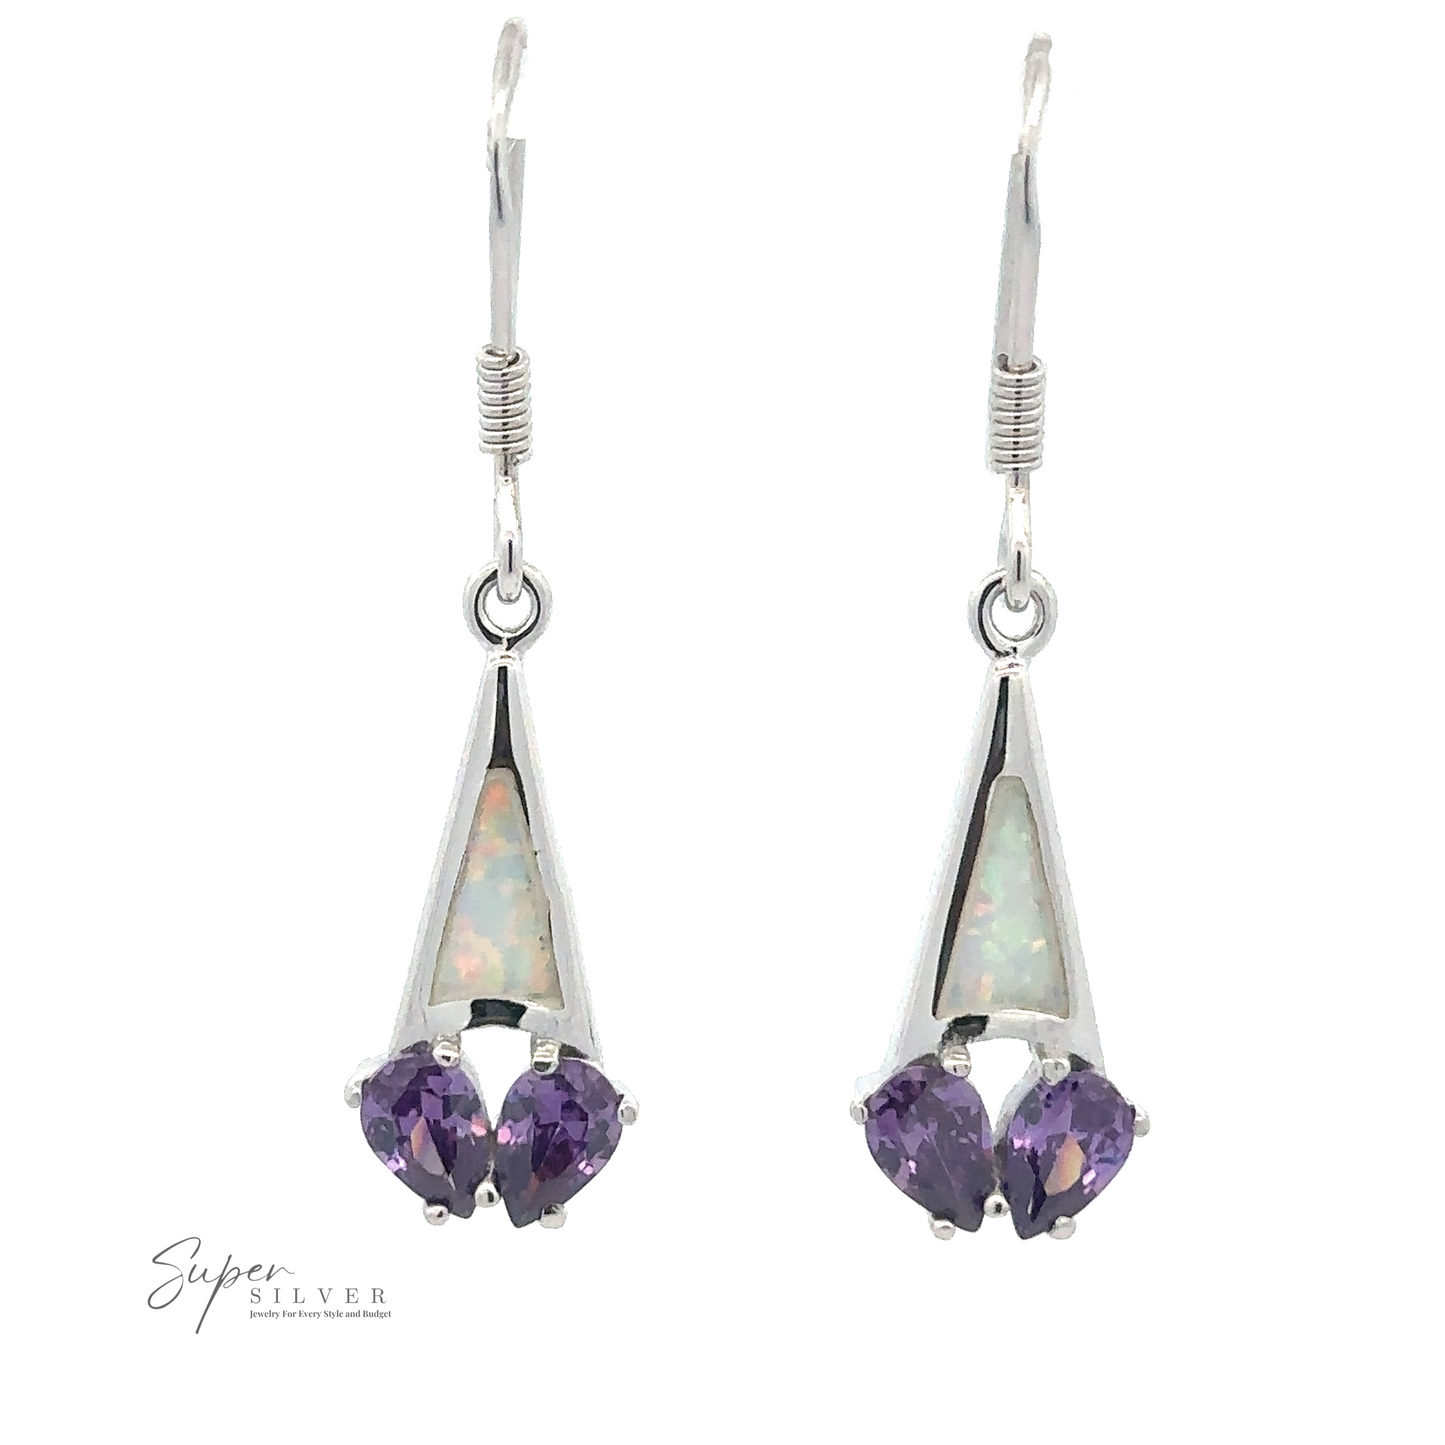 
                  
                    A pair of Created Opal Earrings with Purple Cubic Zirconia featuring a triangular created opal and two heart-shaped purple CZ stones dangling below. The brand name "Super Silver" is visible in the lower-left corner.
                  
                